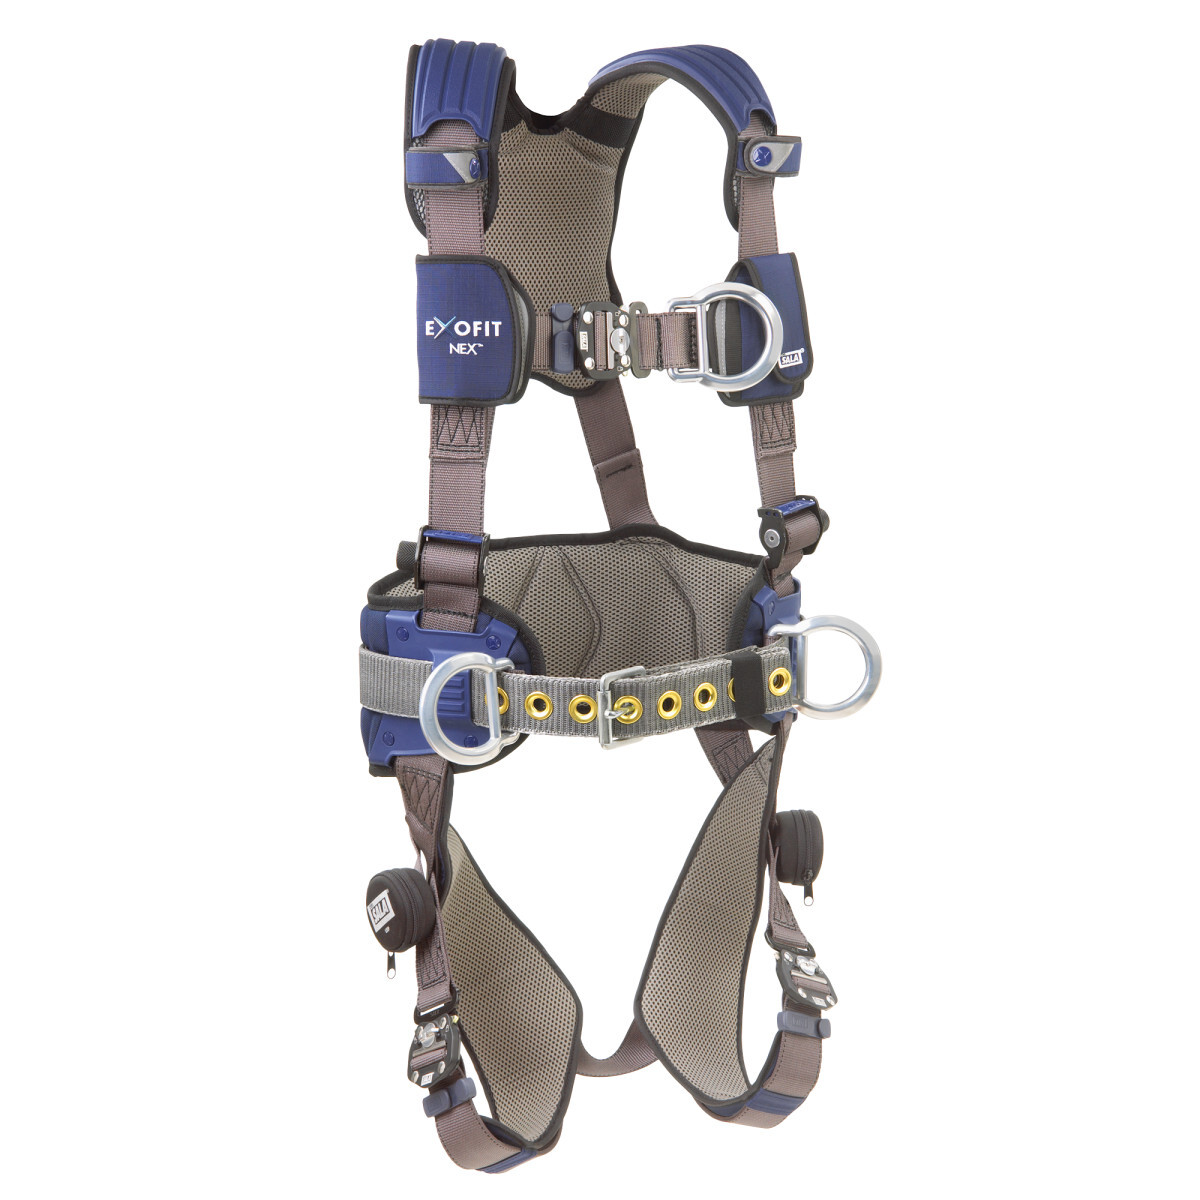 3M™ DBI-SALA® X-Large ExoFit NEX™ Construction/Full Body Style Harness With Tech-Lite™ Aluminum Back, Front And Side D-Ring, Duo